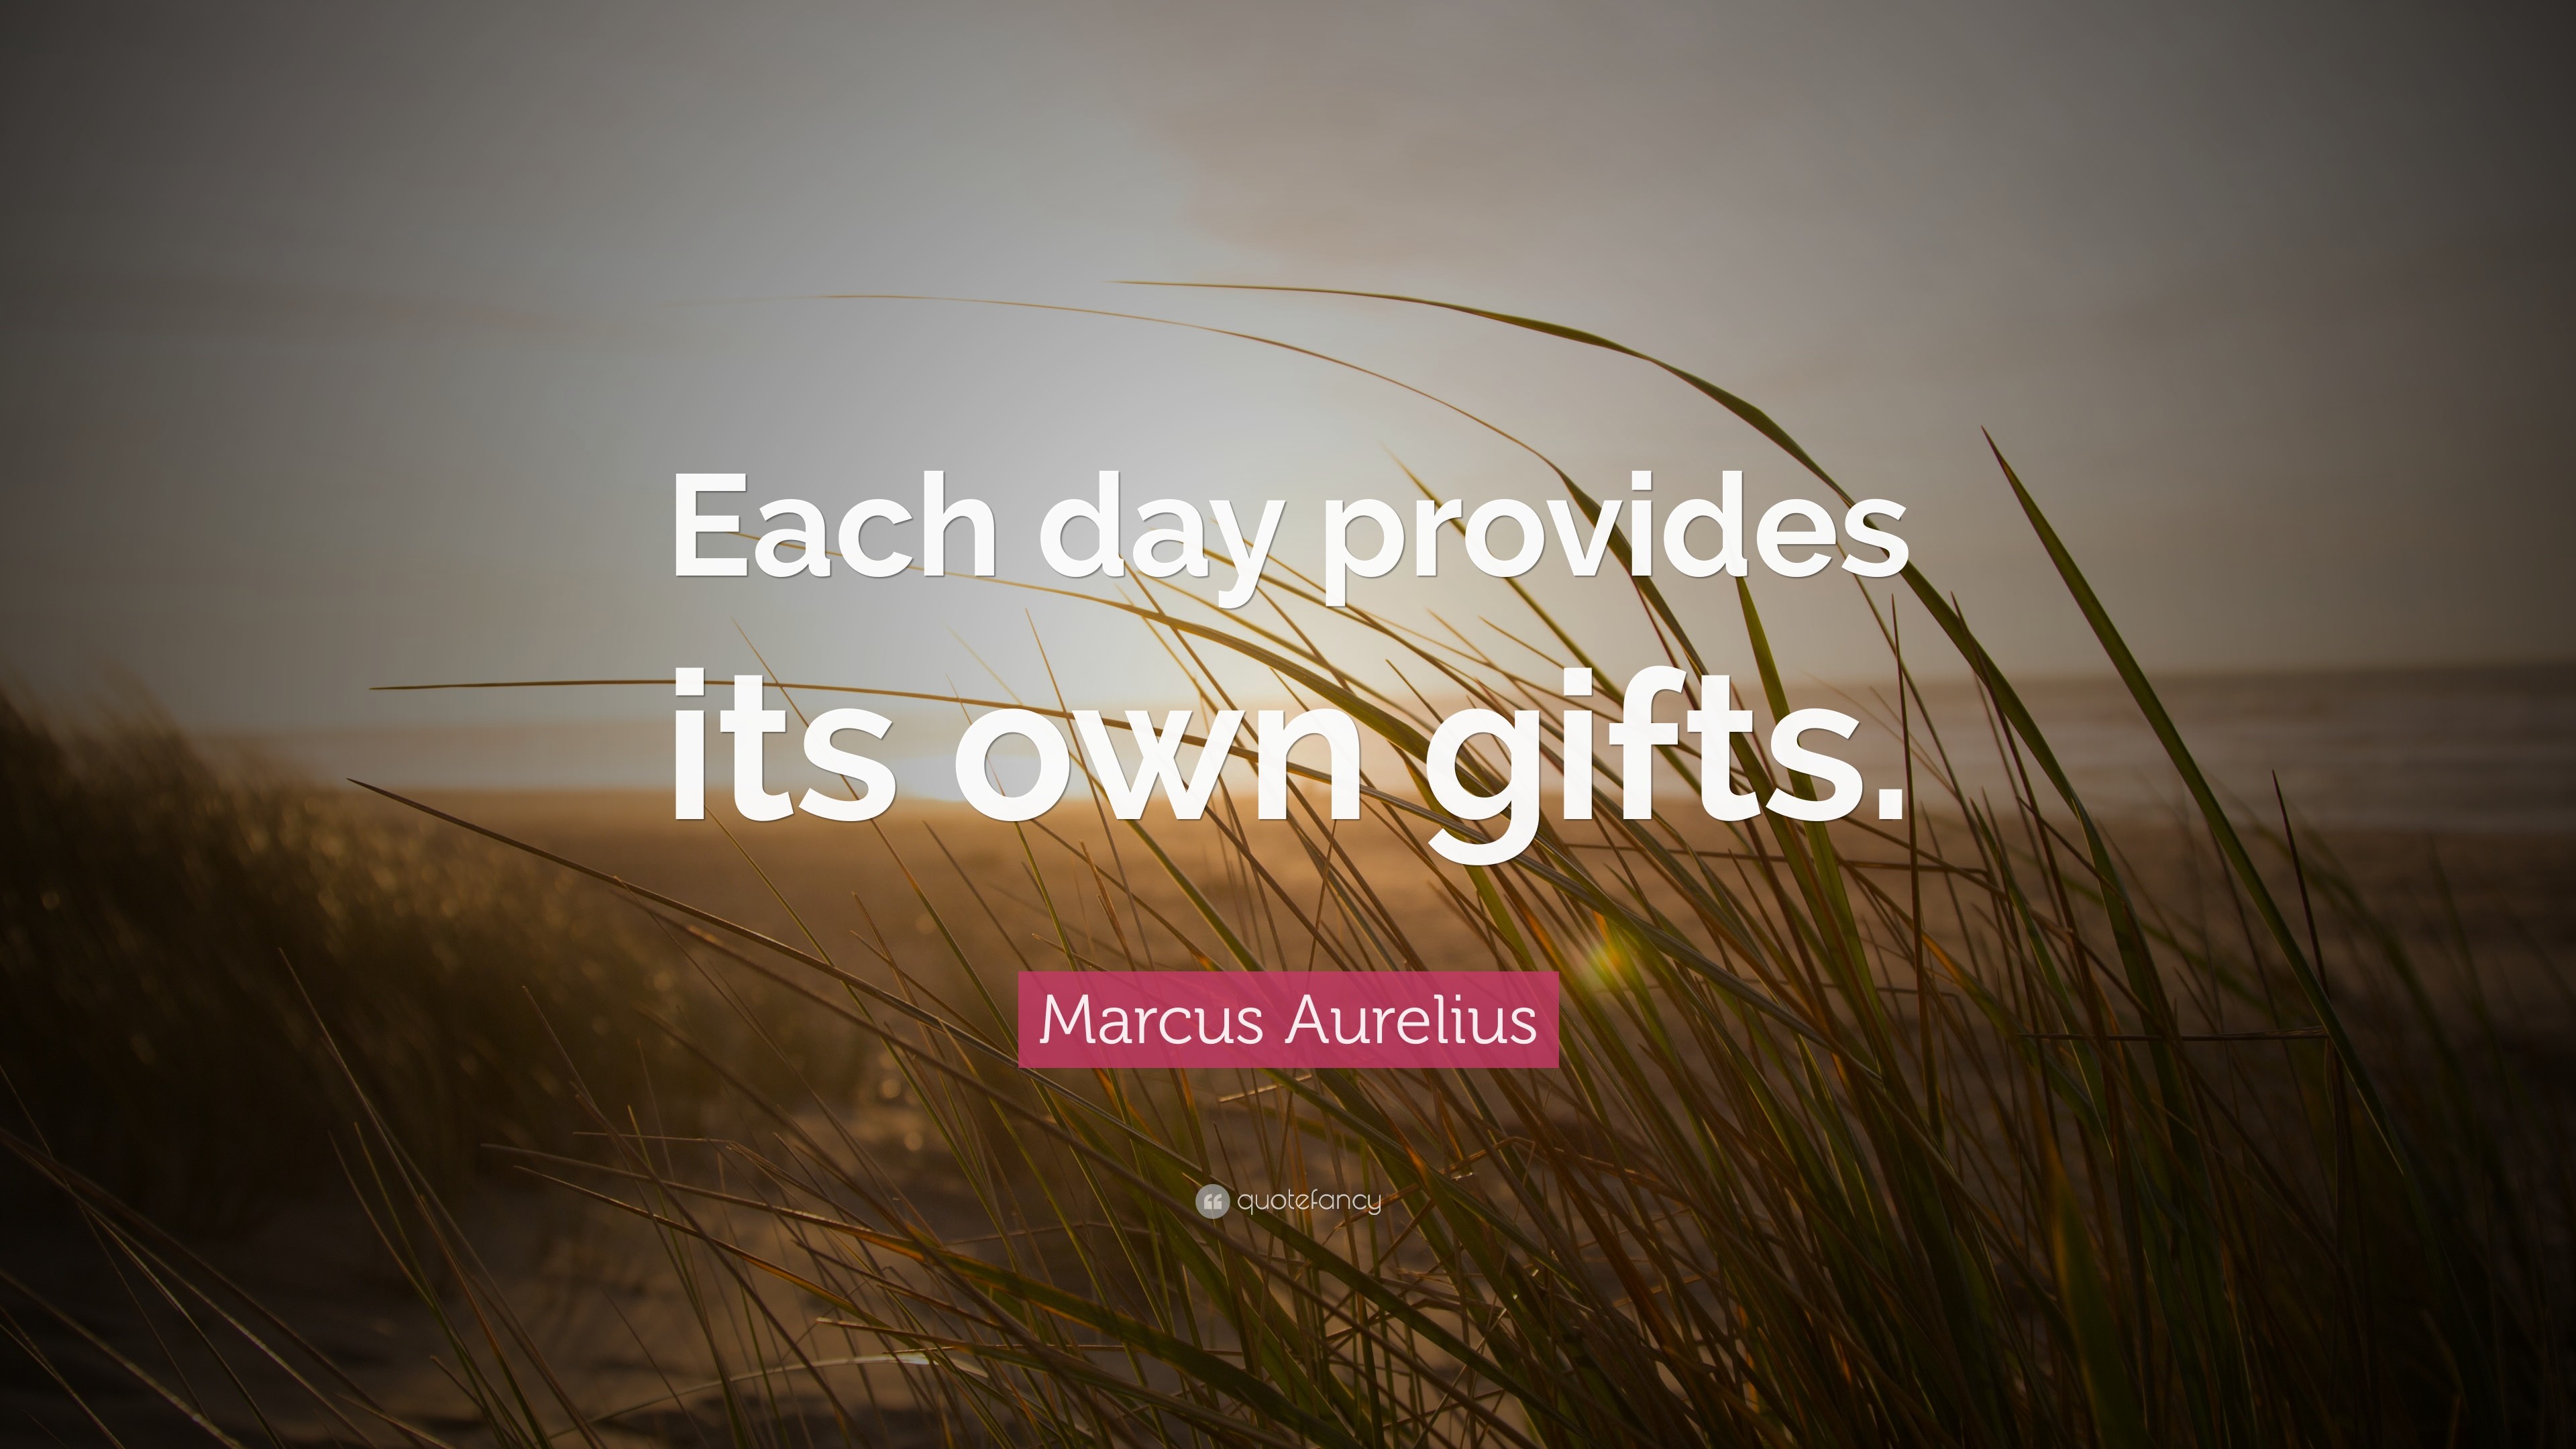 3840x2160 Gratitude Quotes: “Each day provides its own gifts.” — Marcus Aurelius